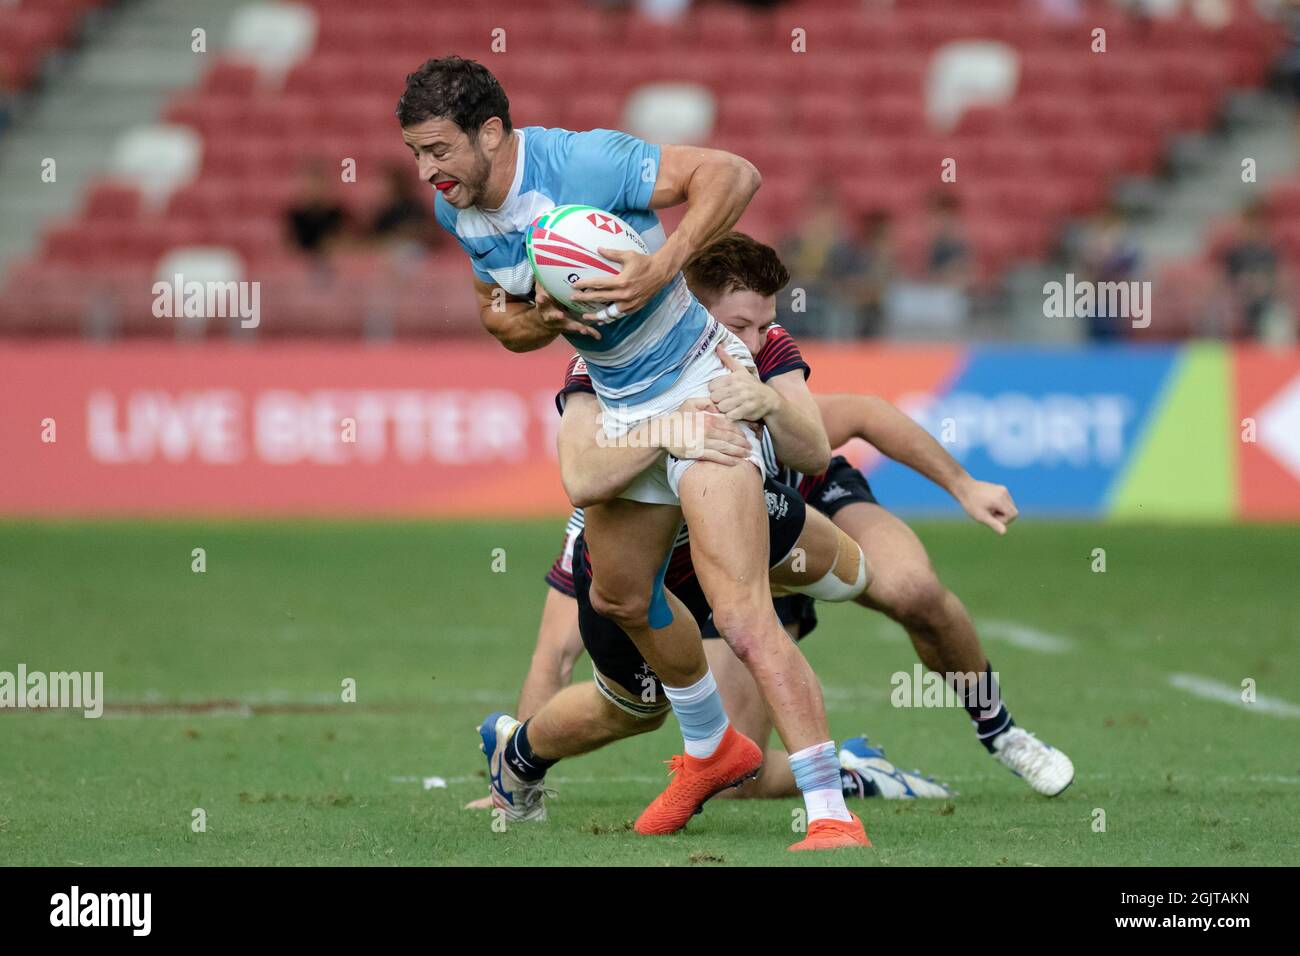 SINGAPORE-APRIL 13:Argentina 7s team (blue/white) plays against Hong Kong 7s Team (blue) during Day 1 of HSBC World Rugby Singapore Sevens on April 13, 2019 at National Stadium in Singapore Stock Photo